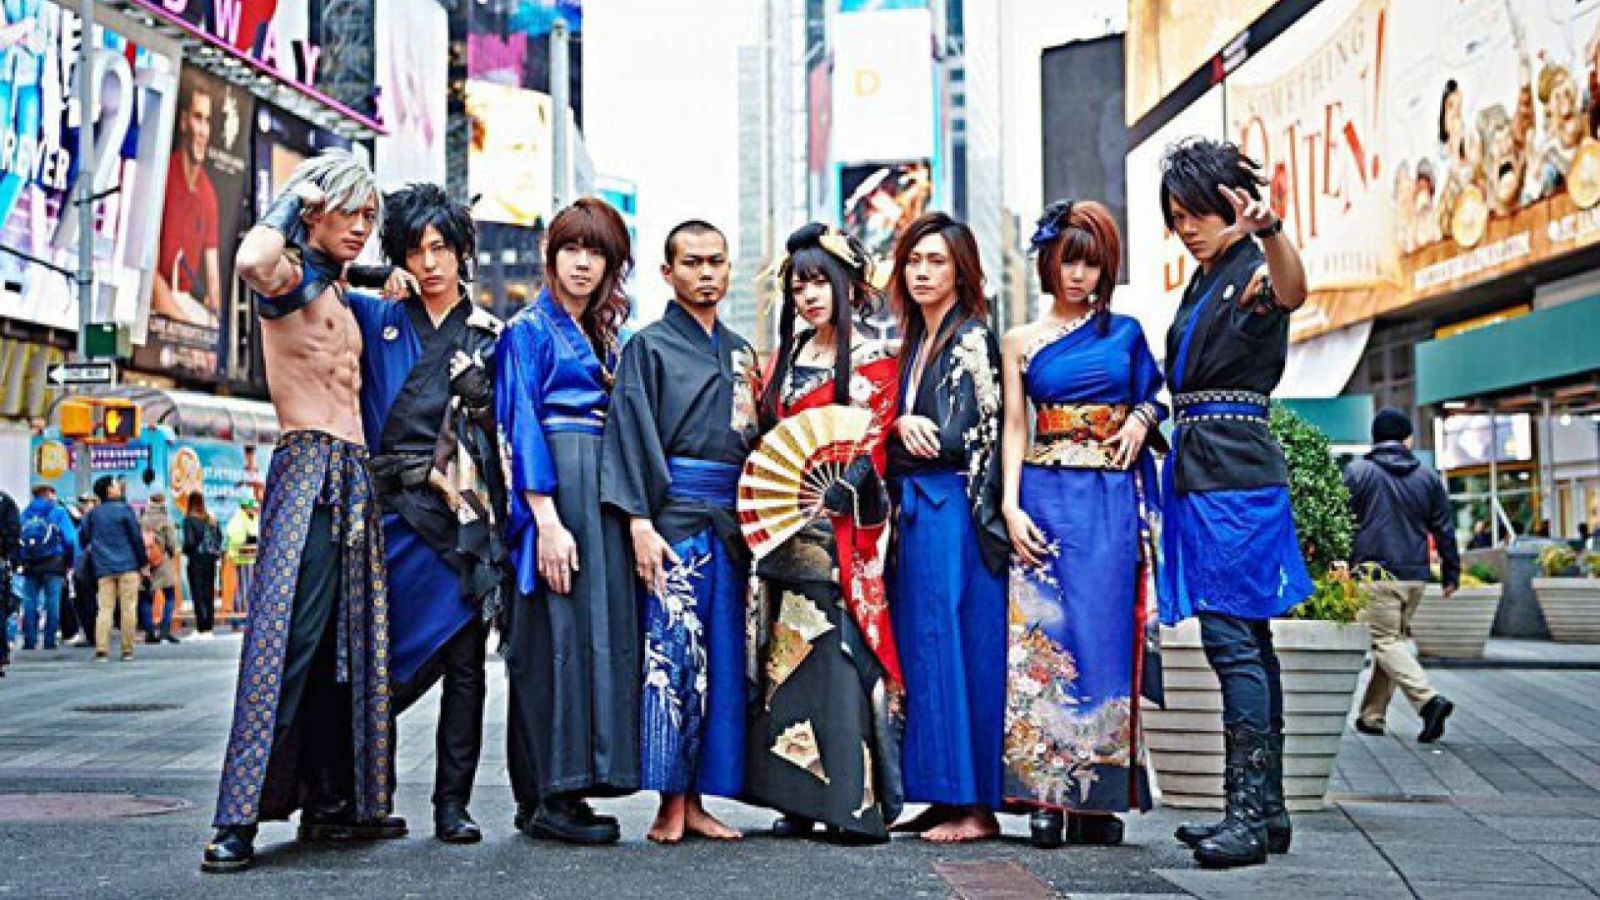 Interview with WagakkiBand © 2016 avex music creative. All rights reserved.